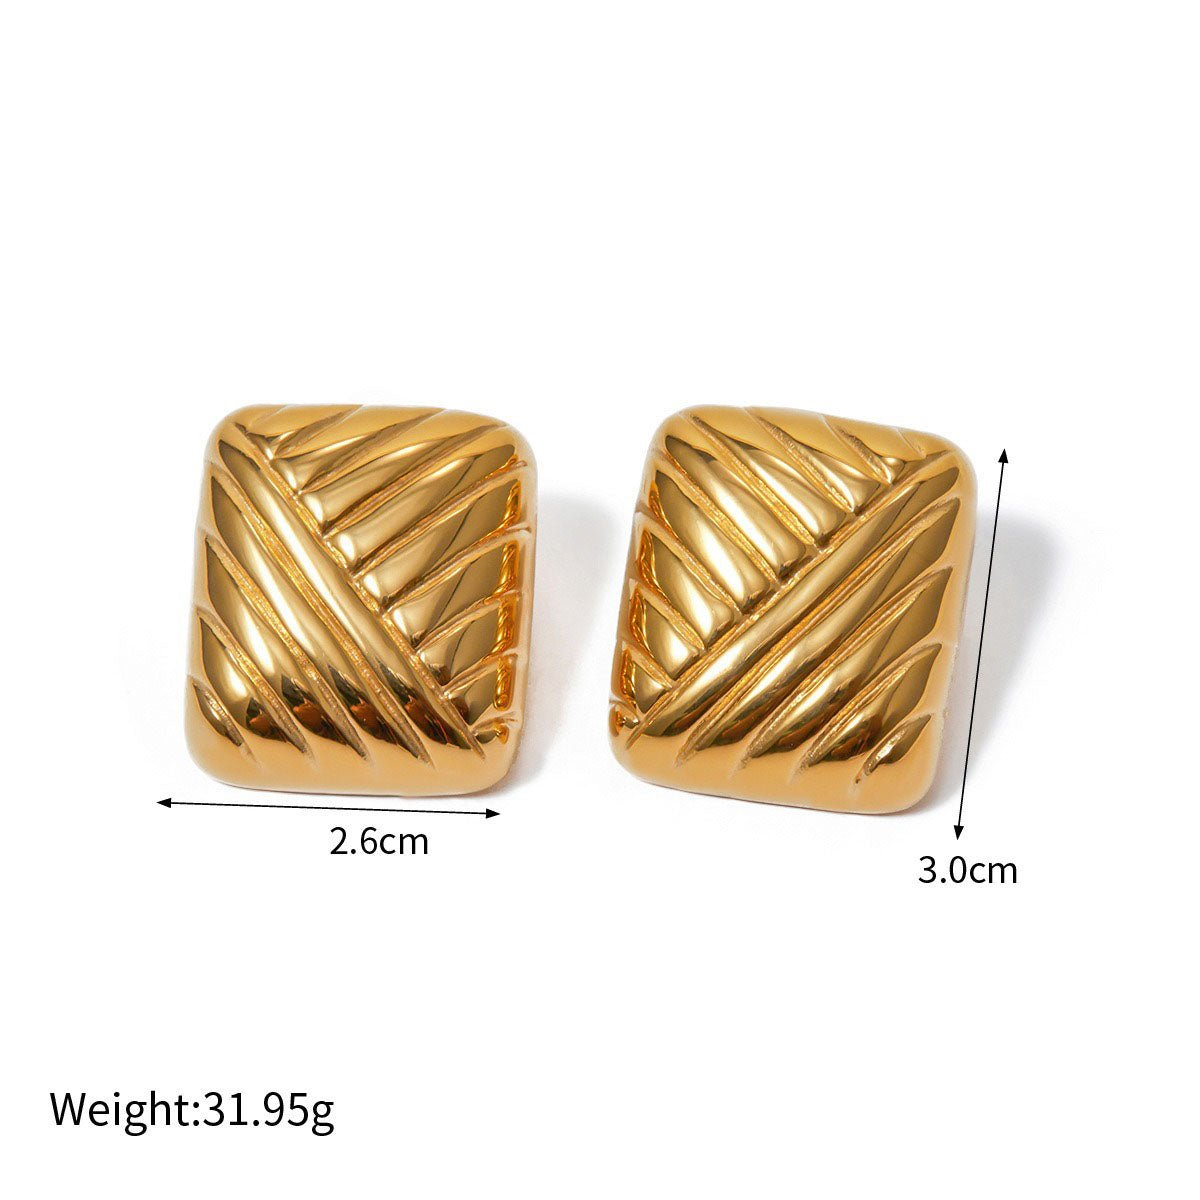 18k gold classic retro square braided design earrings - JuVons